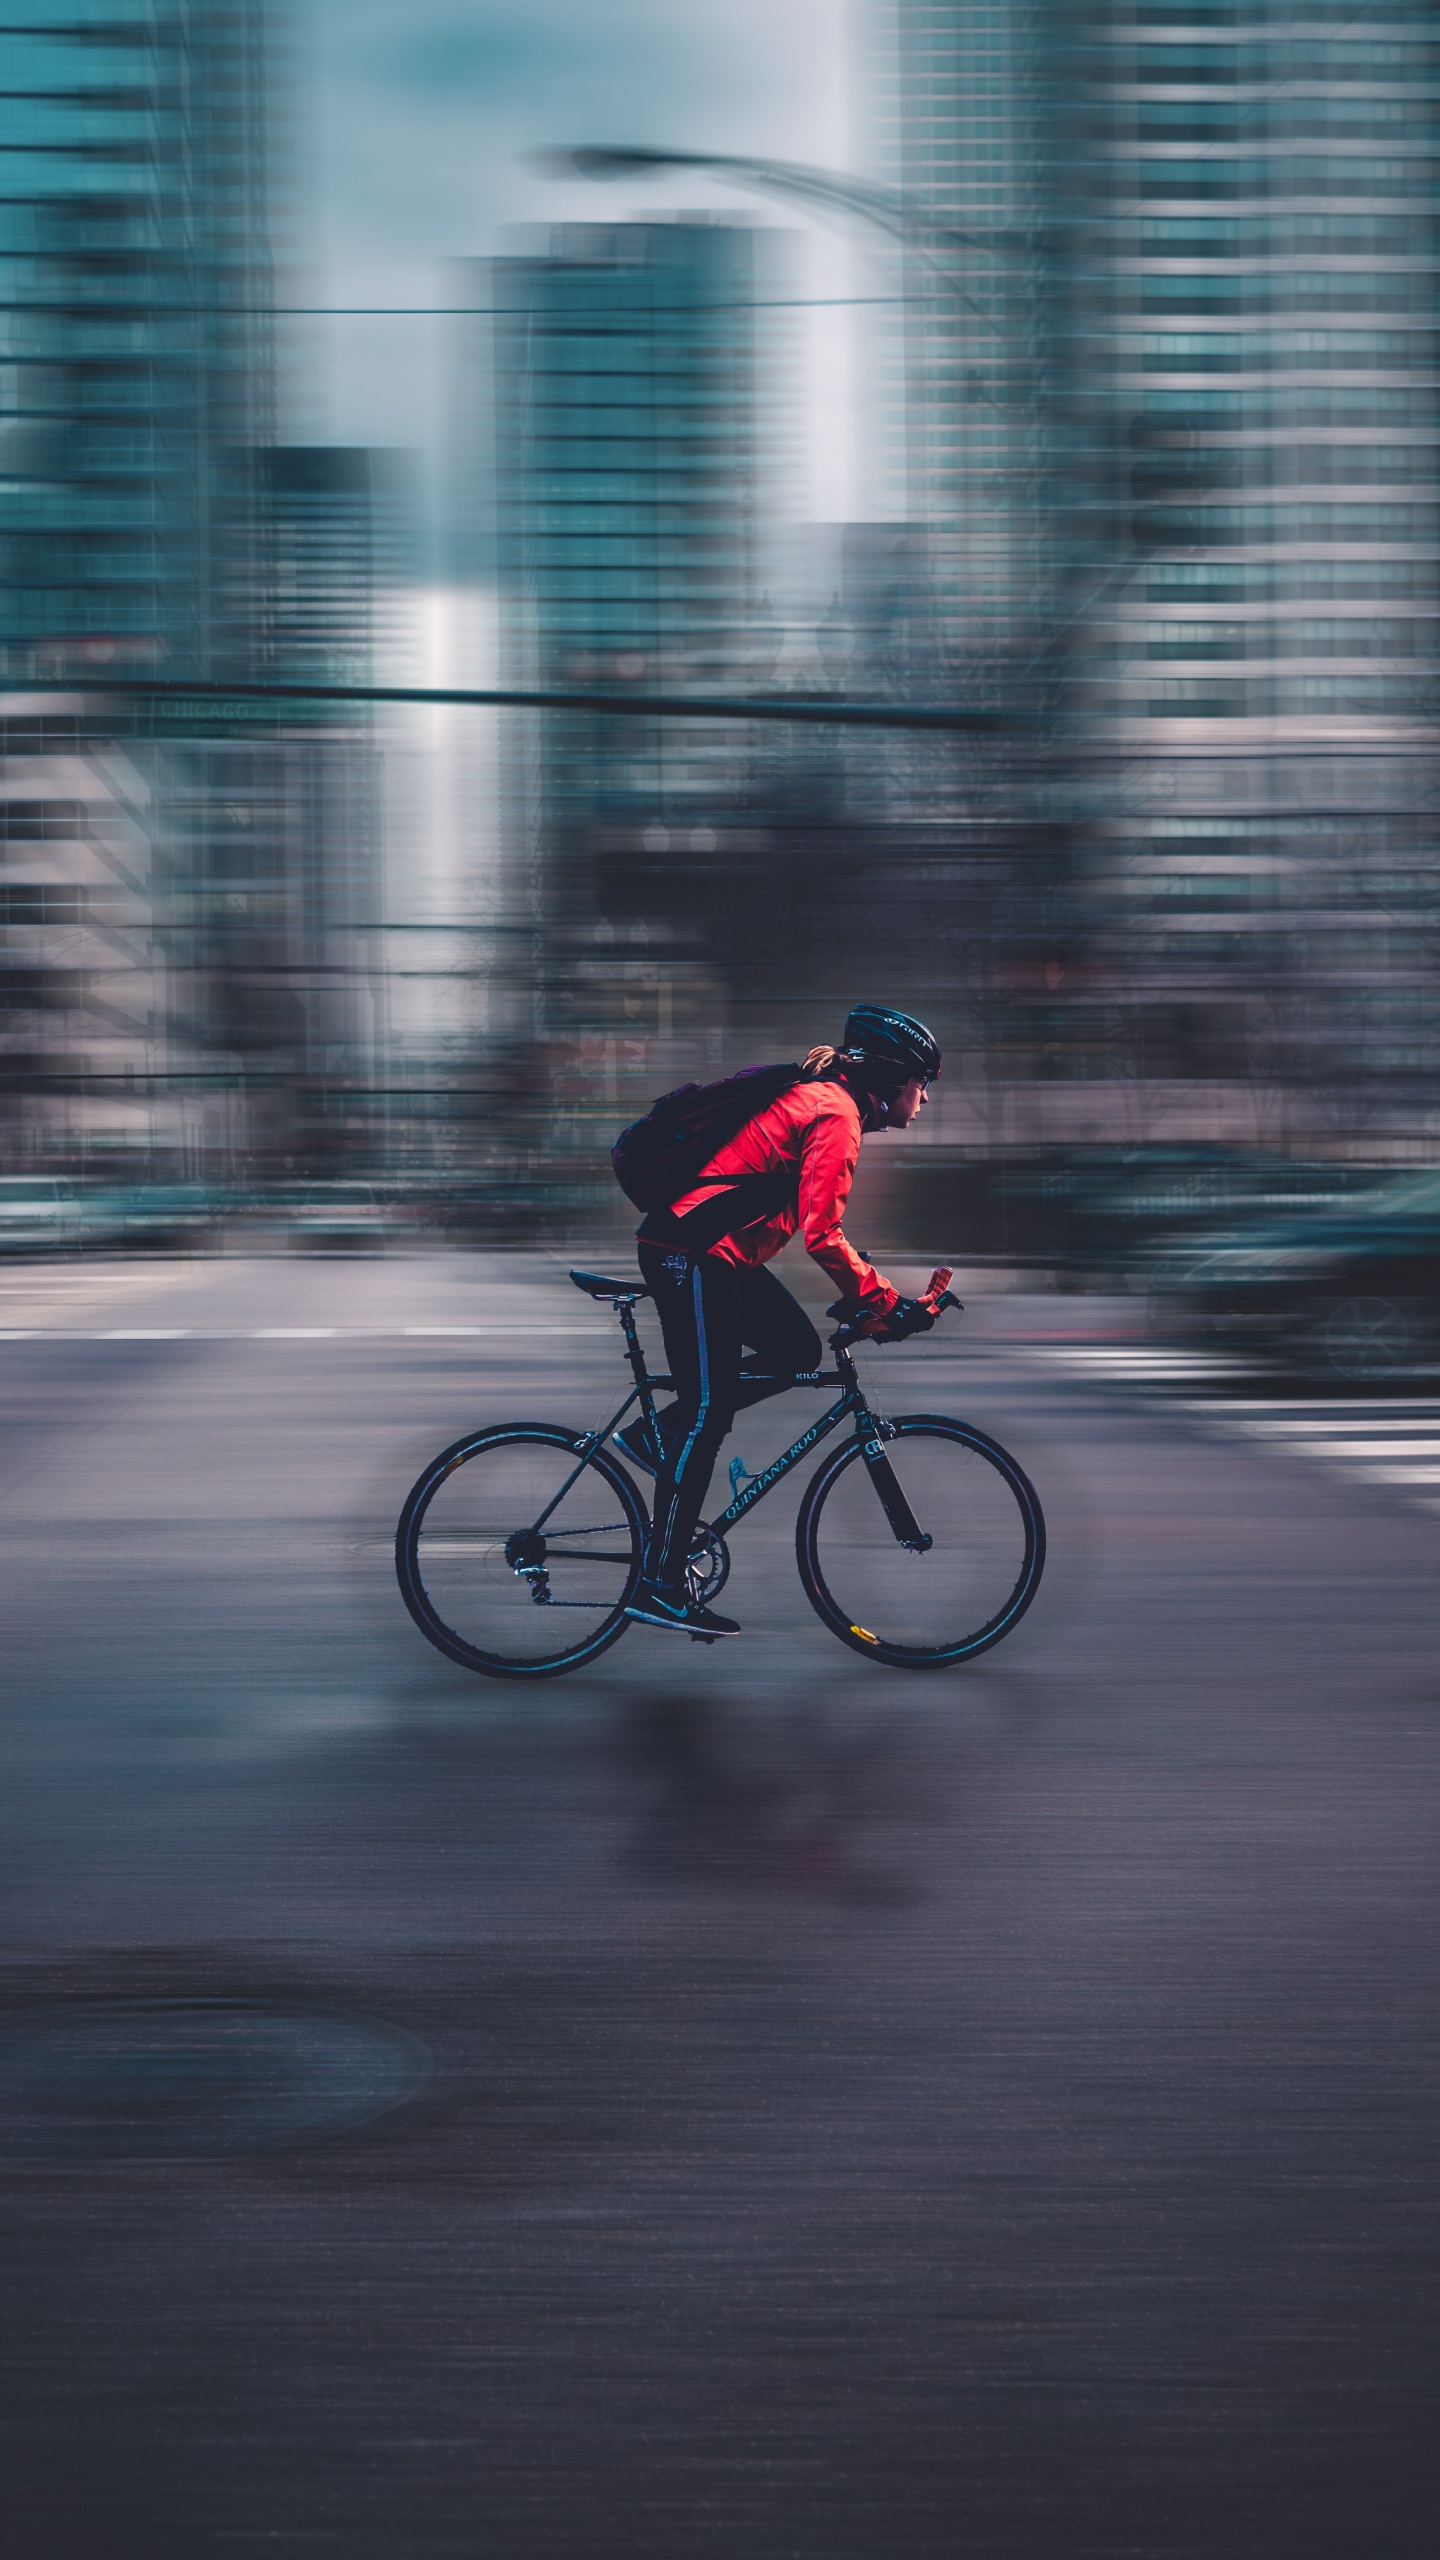 Man in Red Jacket Riding Bicycle on Road During Daytime. Wallpaper in 1440x2560 Resolution